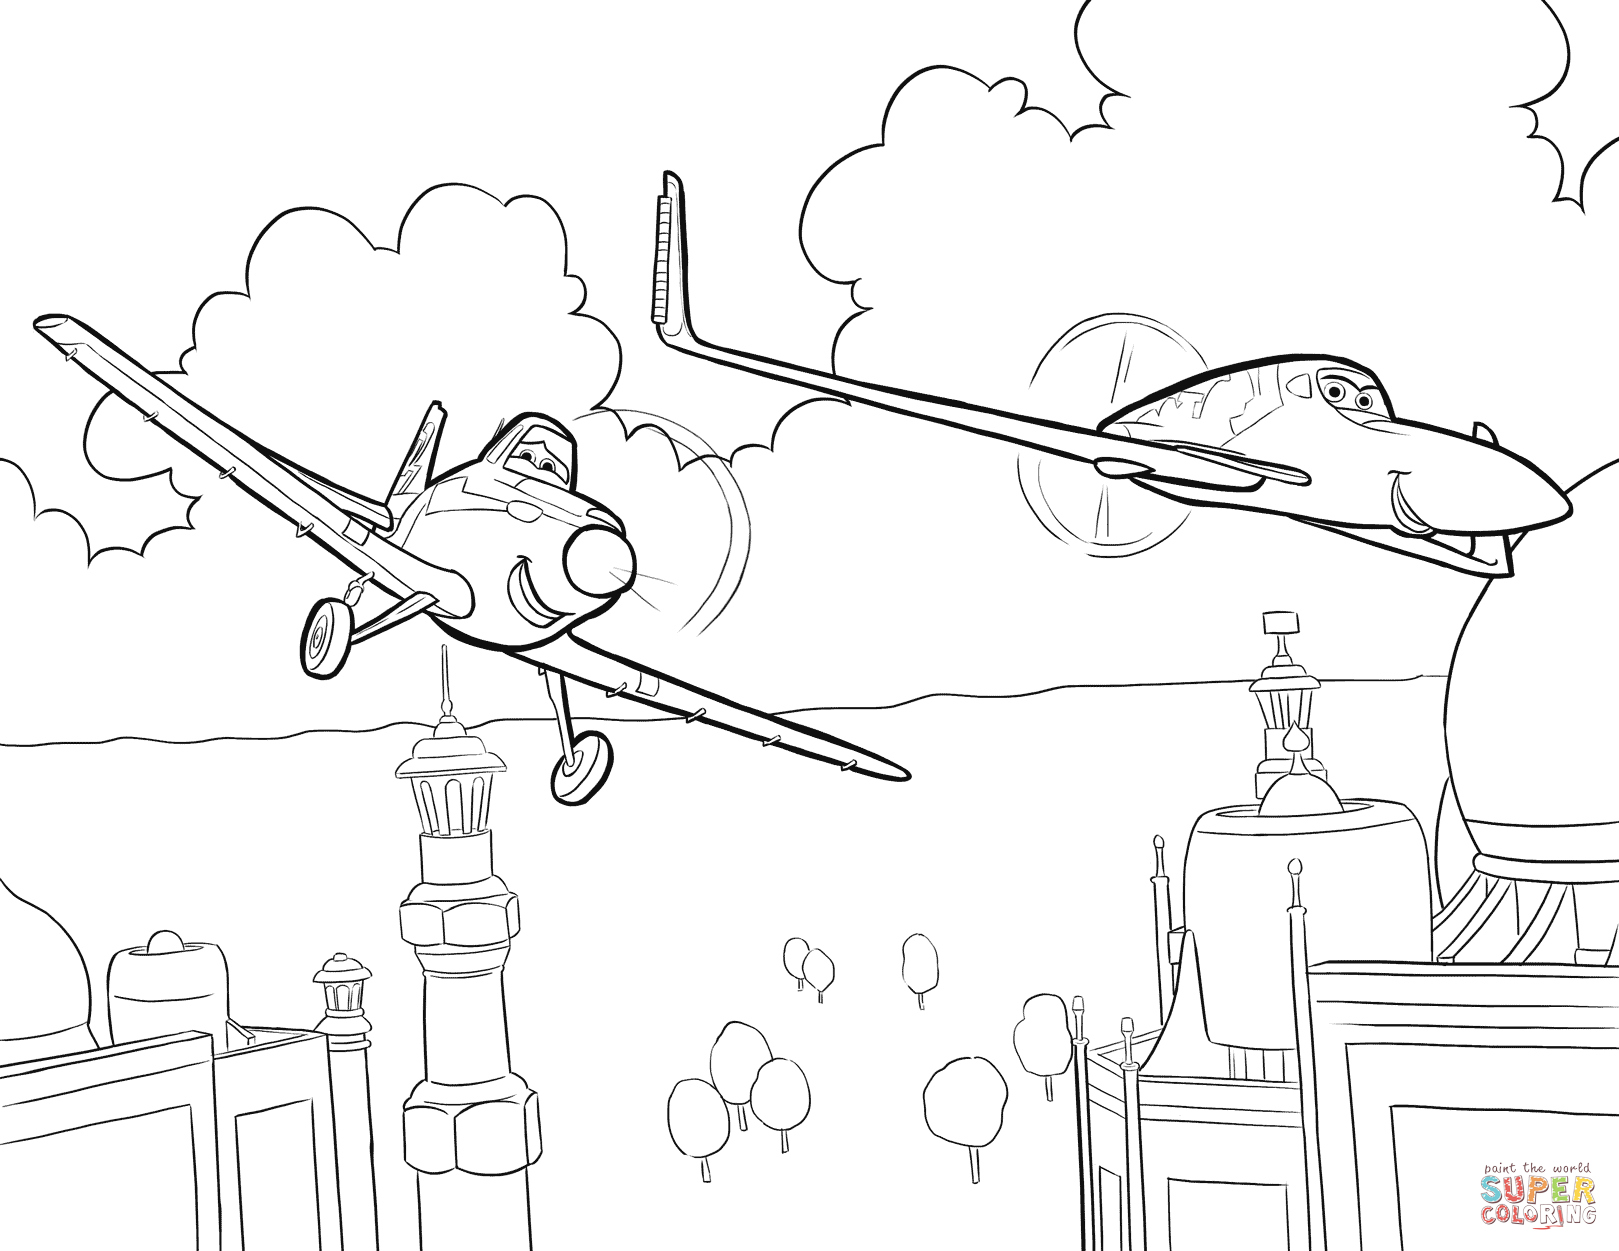 747 Coloring Page at GetColorings.com | Free printable colorings pages